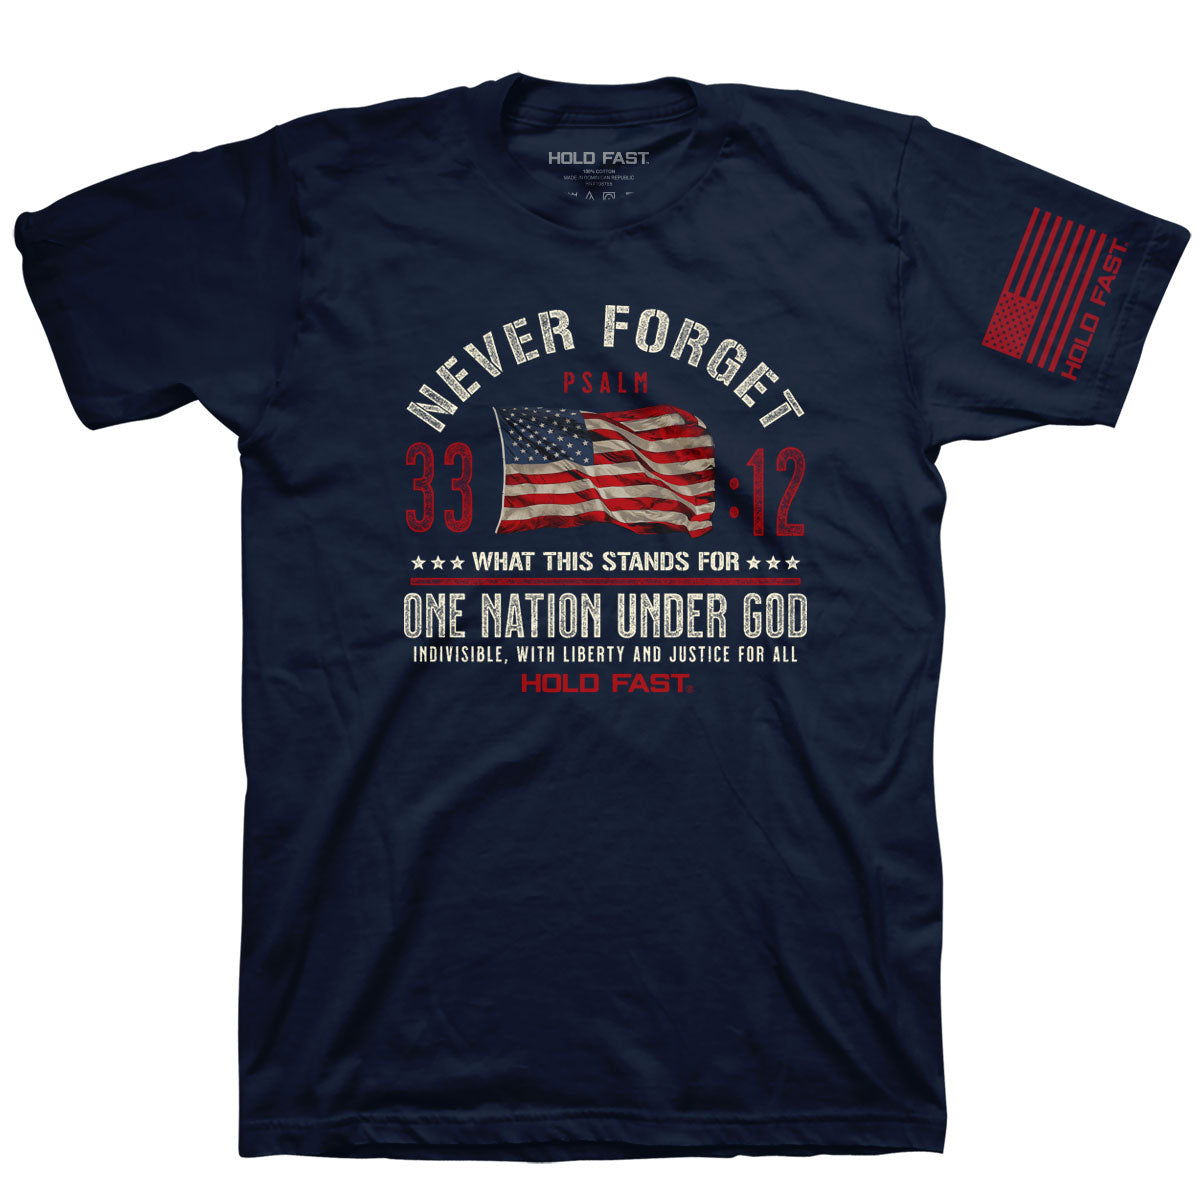 Hold Fast Never Forget USA Unisex T-Shirt